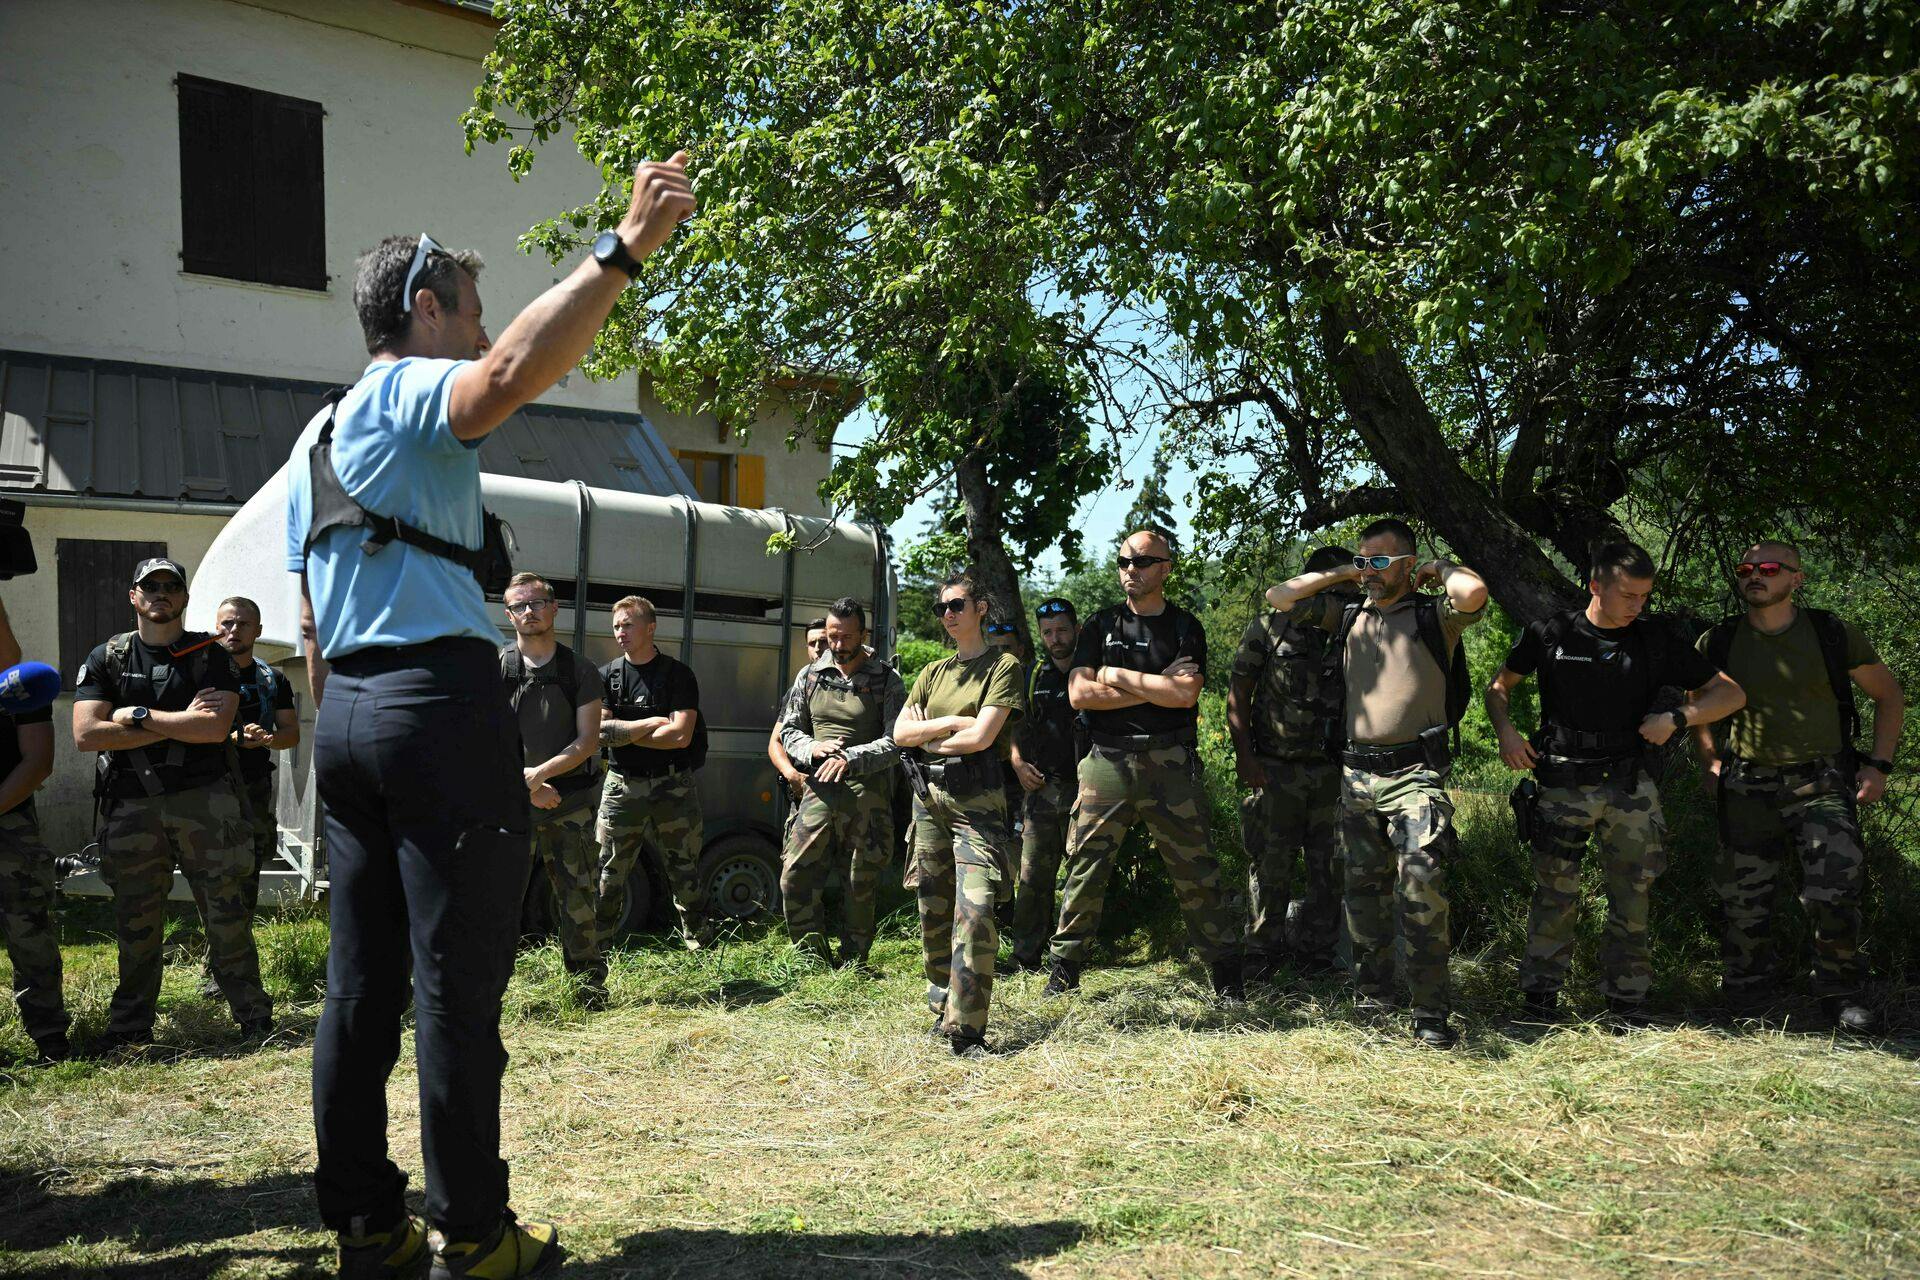 French gendarmes are briefed Volunteers before taking part in a search operation for two-and-a-half-year-old Emile who is reporting missing for two days, on July 10, 2023 in the French southern Alps village of Le Vernet. Emile was last seen playing in the garden at his grandparents' house on July 8, 2023. The scope of research has been extended, the Mayor said on Monday 10, 2023. (Photo by NICOLAS TUCAT / AFP)